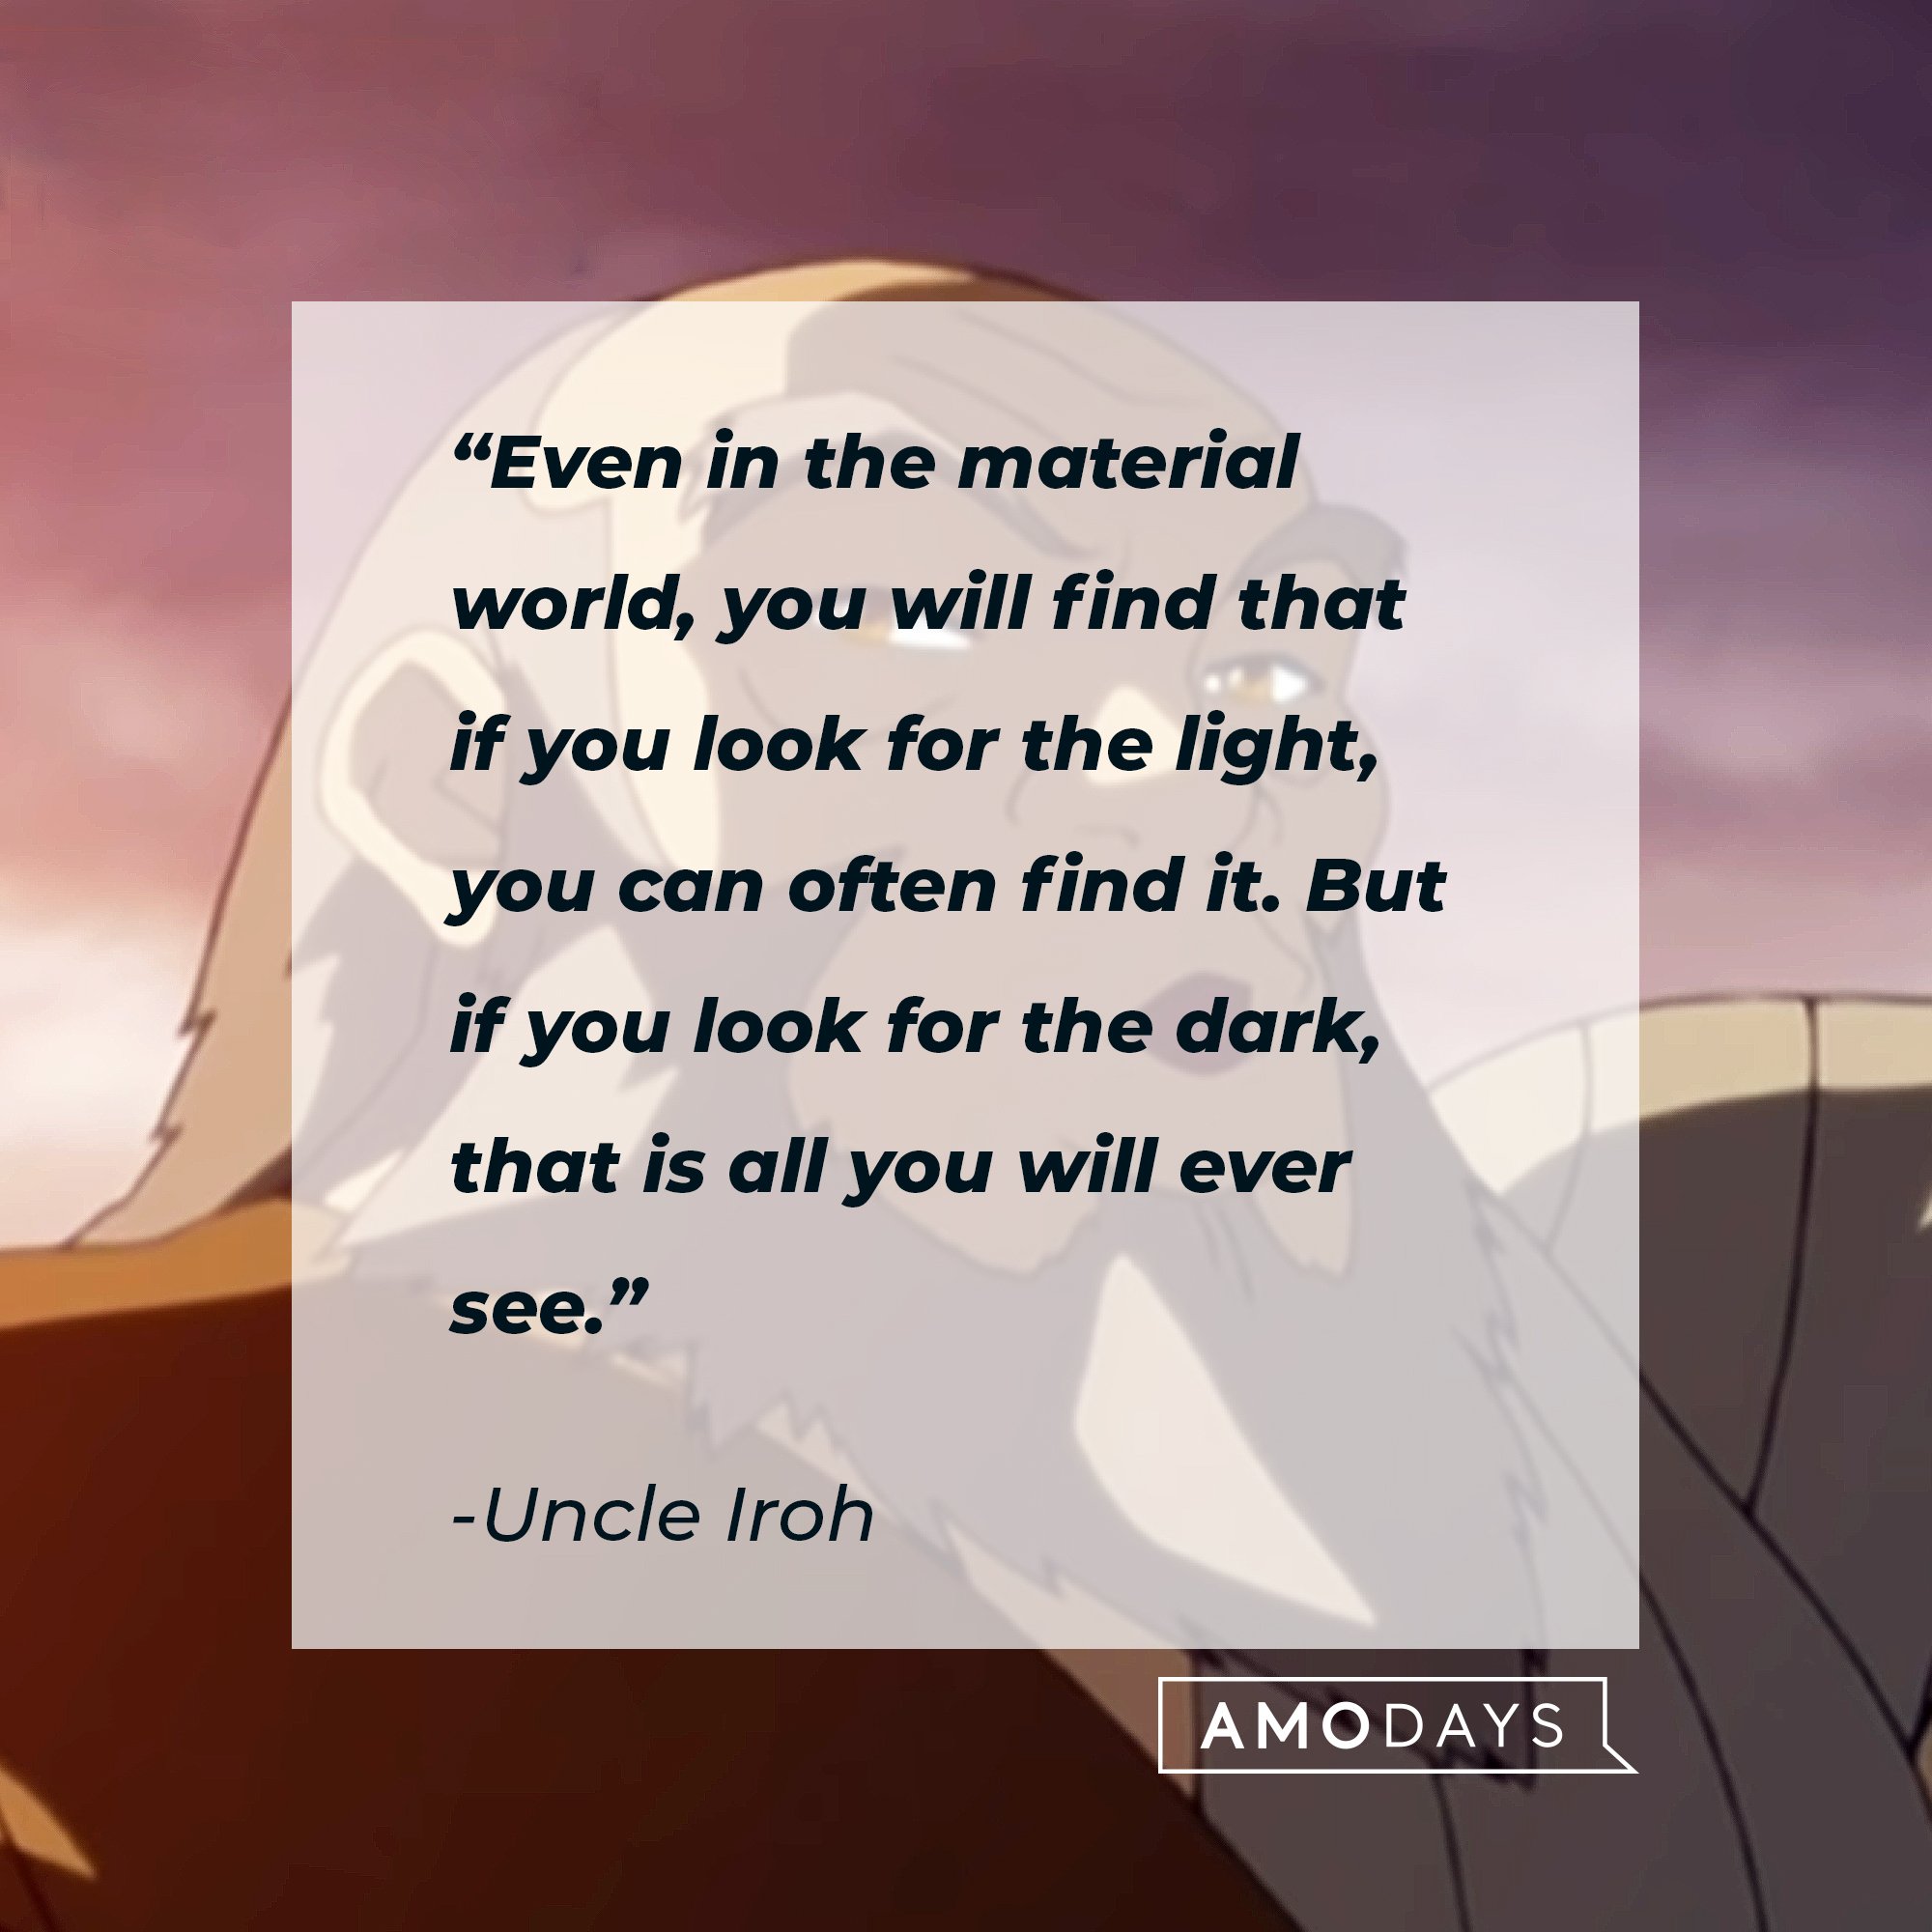 Uncle Iroh's quote: “Even in the material world, you will find that if you look for the light, you can often find it. But if you look for the dark, that is all you will ever see.” | Image: AmoDays